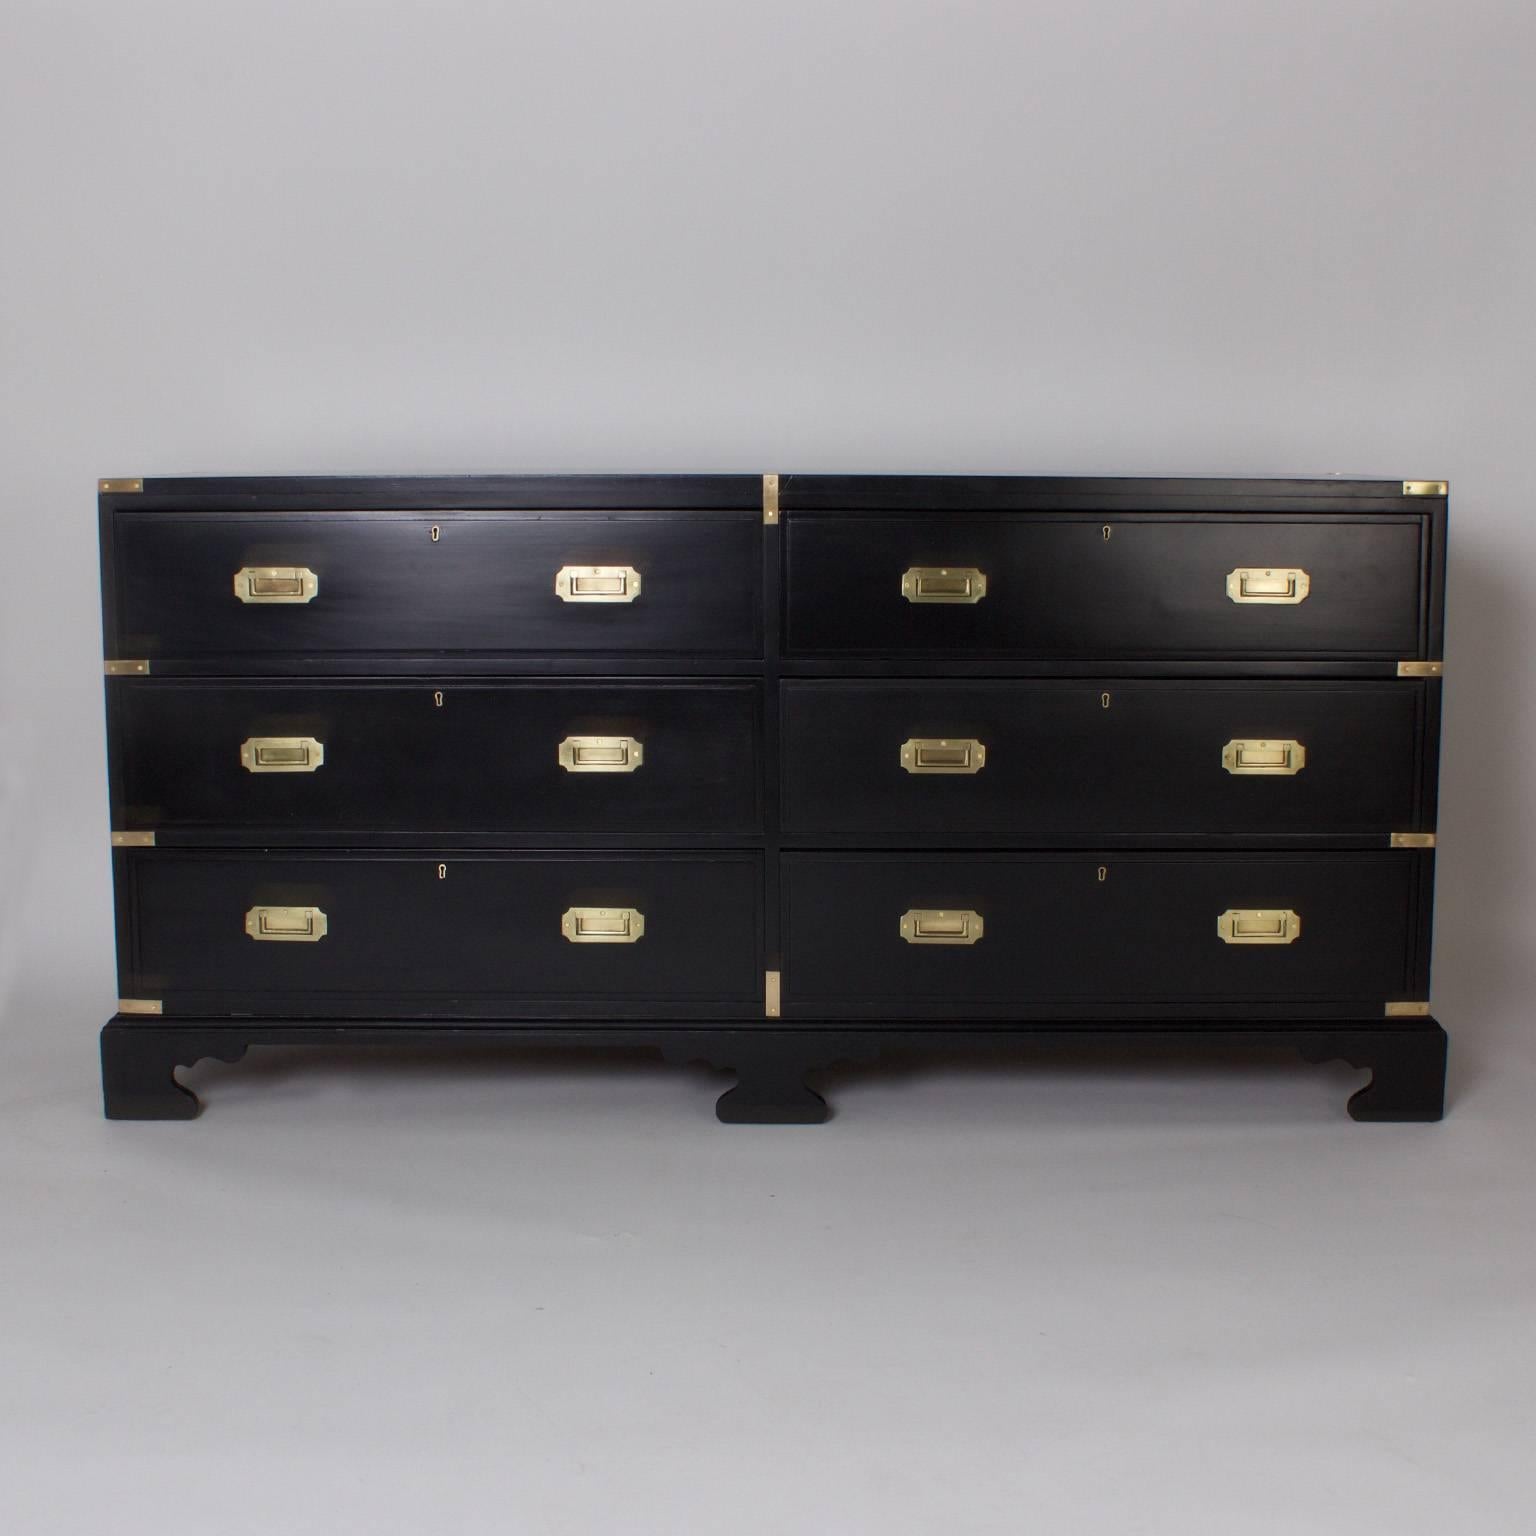 Rare and unusual 19th century double dresser or chest with an ebonized finish, campaign hardware, bracket feet, and a strong stylish presence that defies comparison.